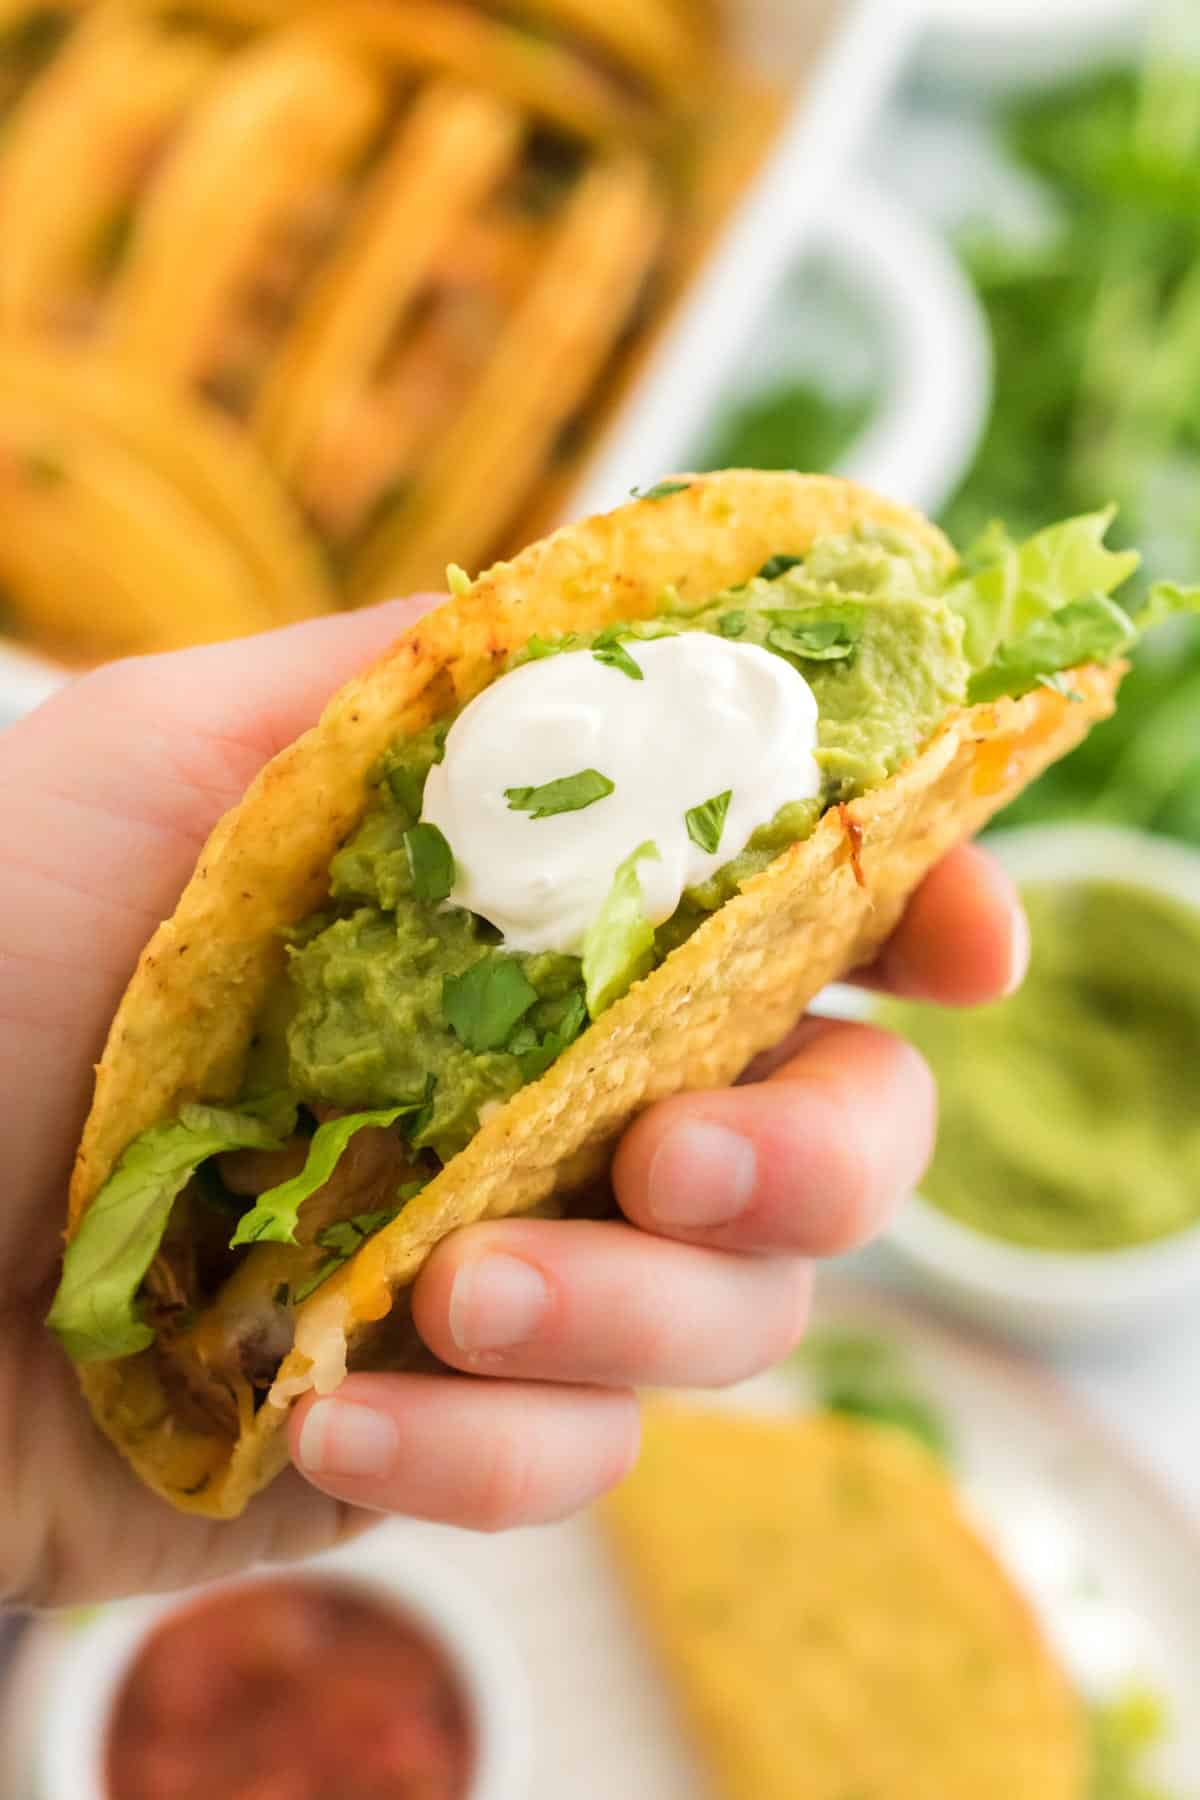 A hand holding a chicken taco filled with toppings and sour cream.